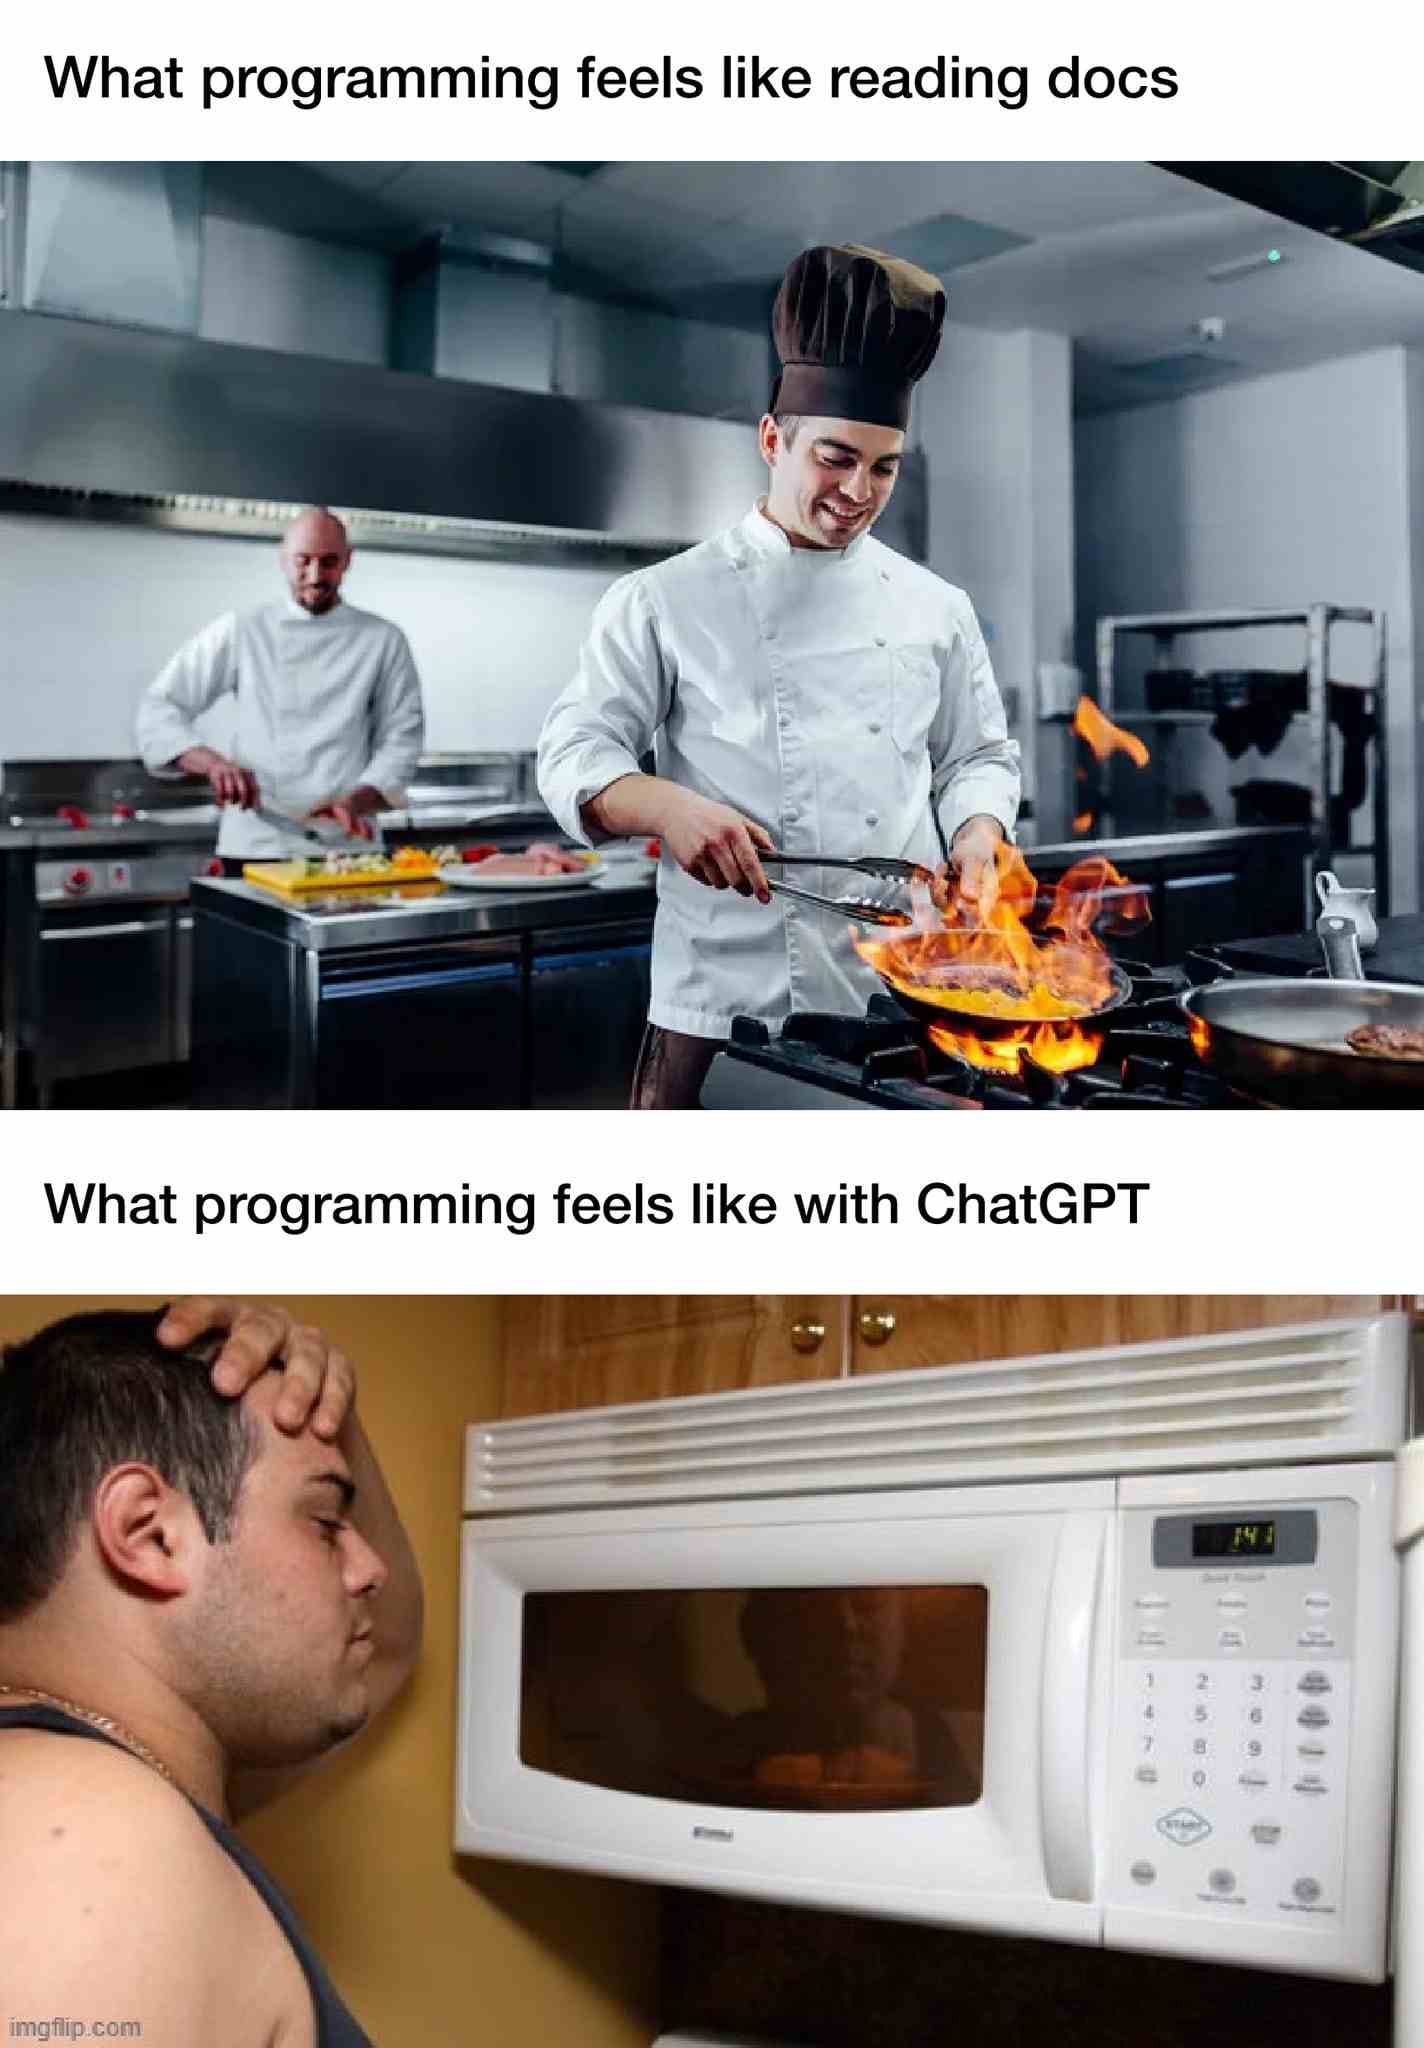 What Programming Feels like with ChatGPT